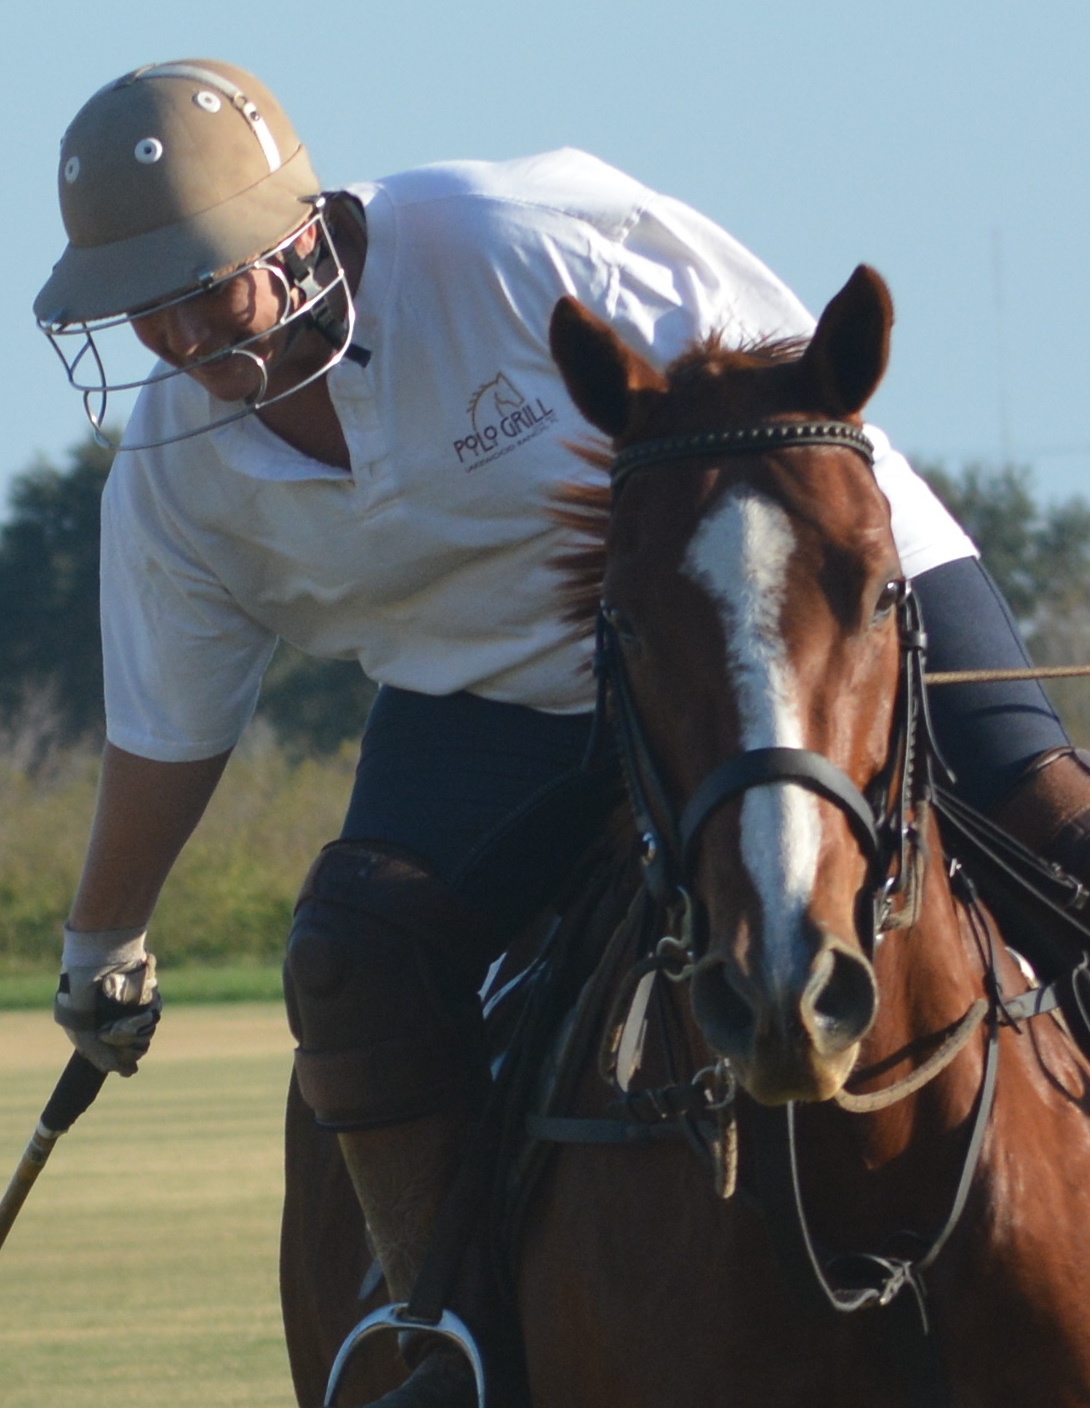 Jaymie Klauber says in polo you have to start your swing two strides before reaching the ball, or it's too late.